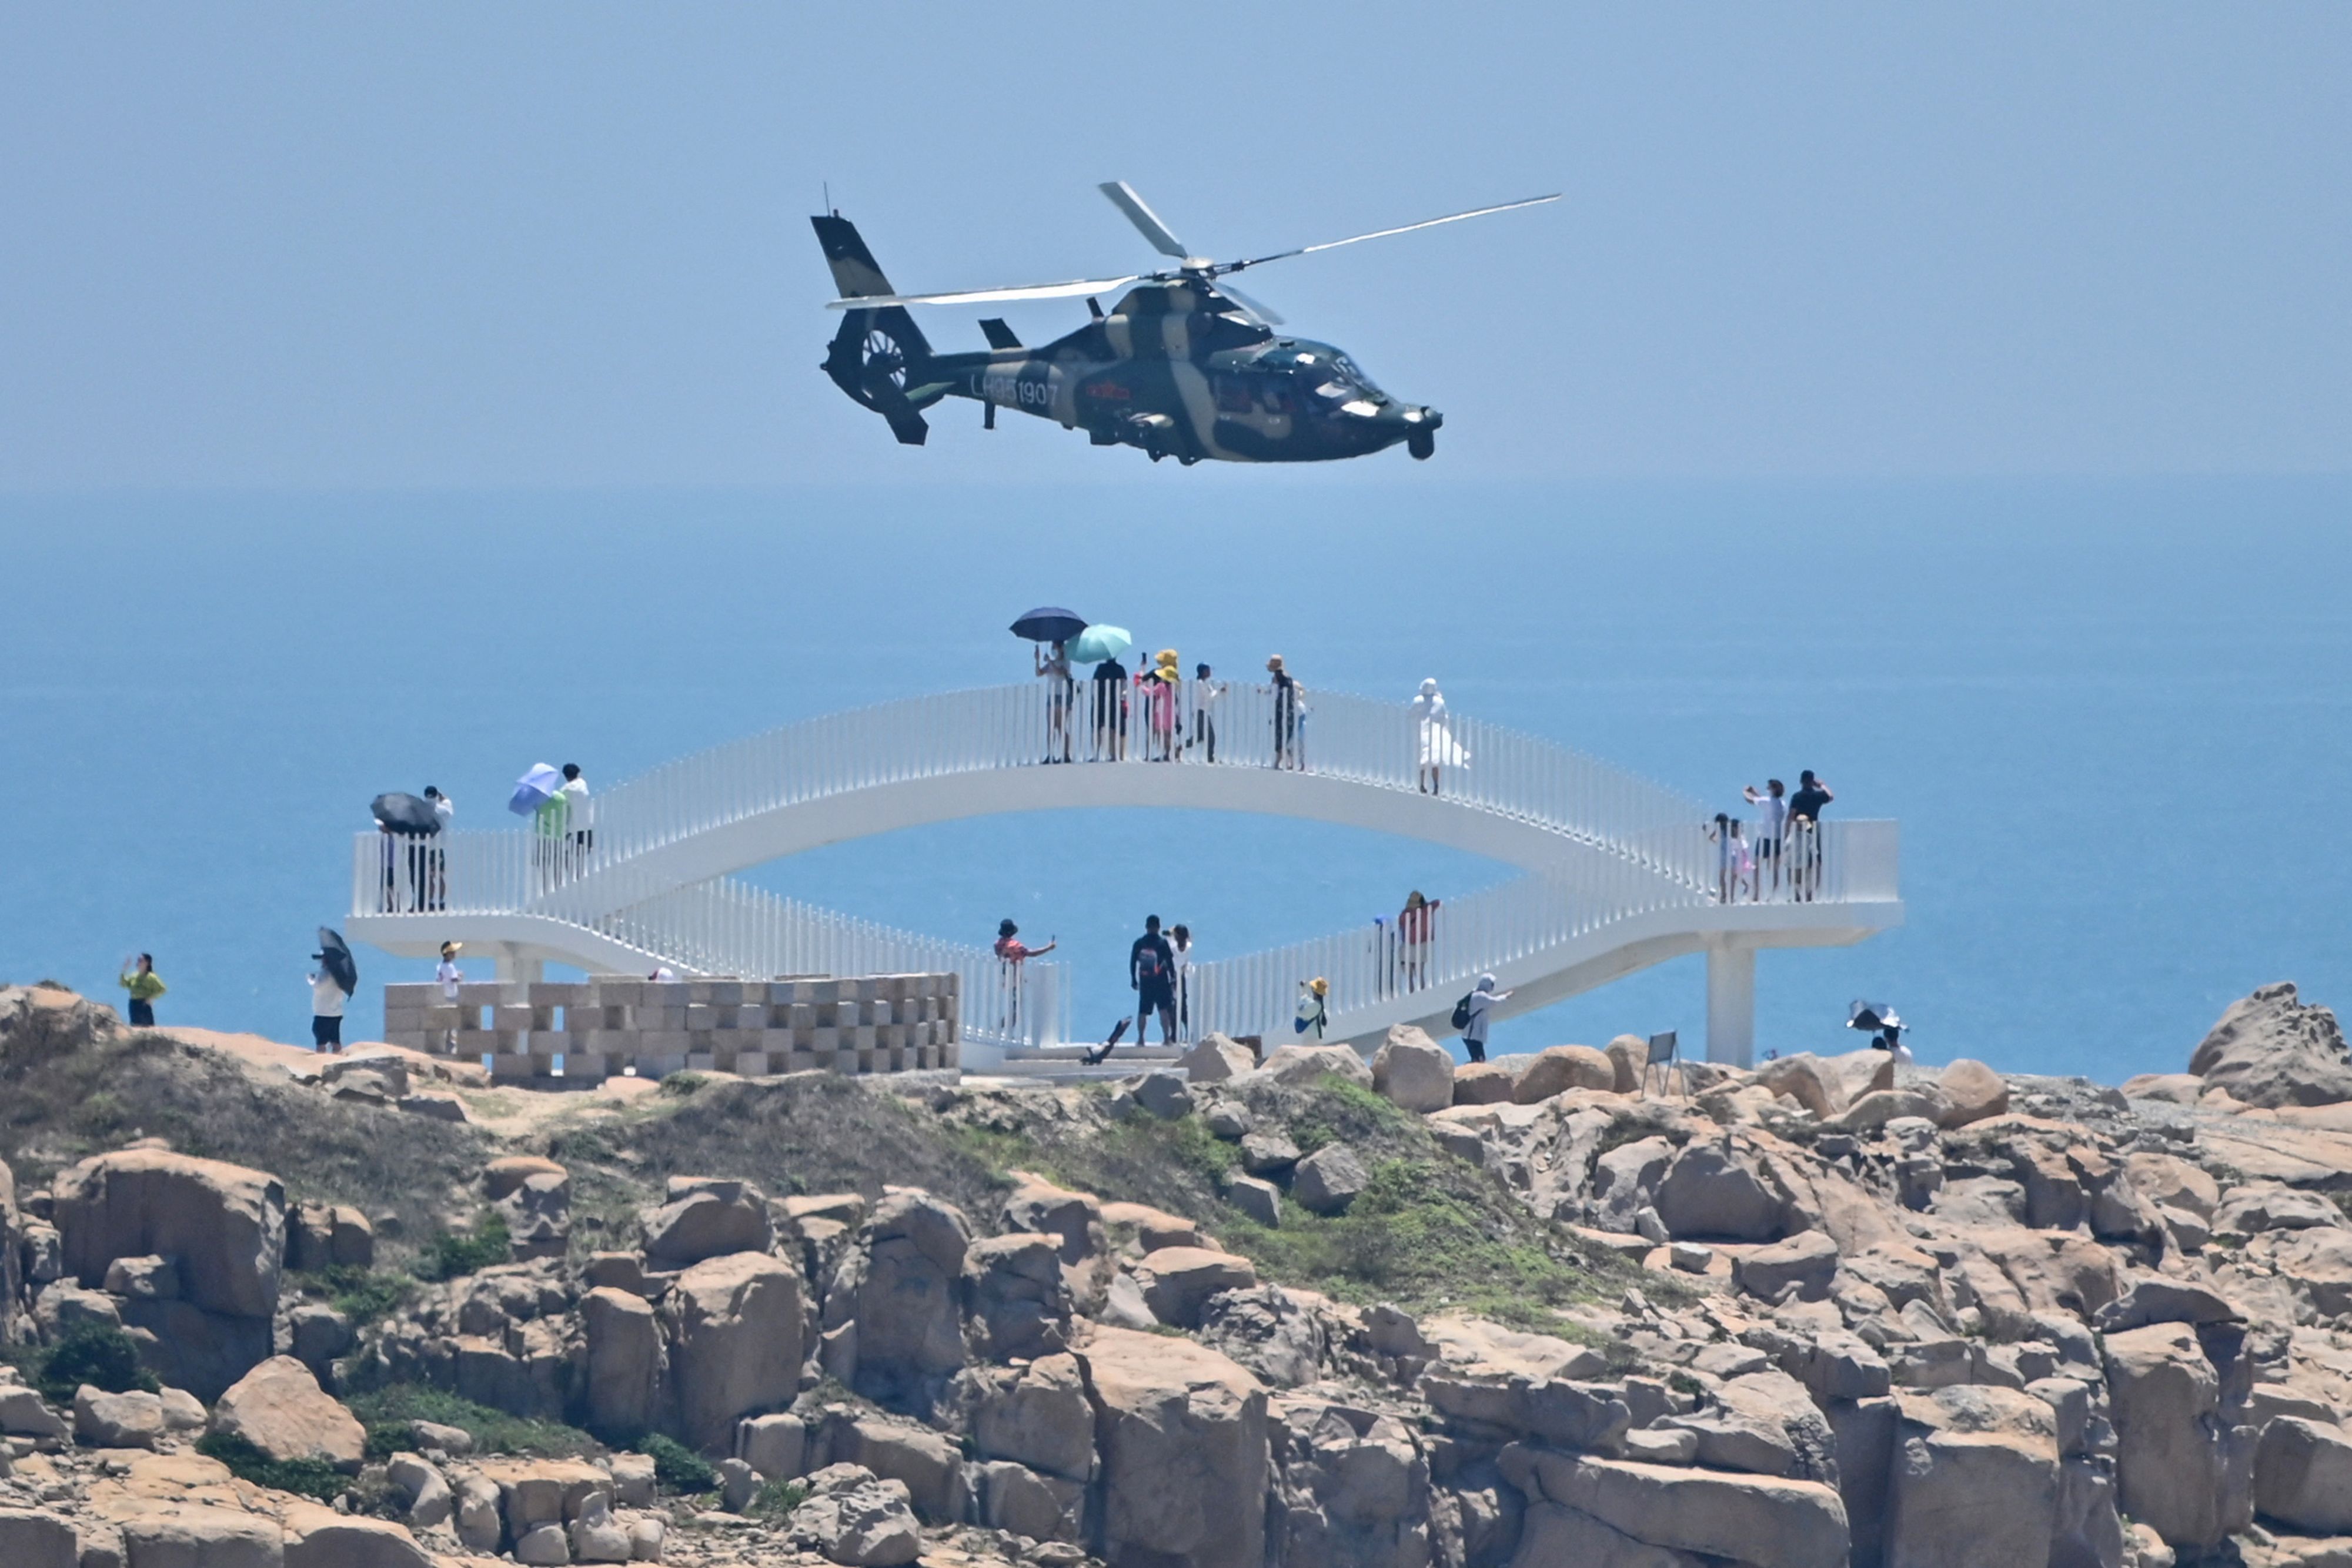  Tourists look on as a Chinese military helicopter flies past Pingtan island, one of mainland China's closest point from Taiwan, in Fujian province on August 4.